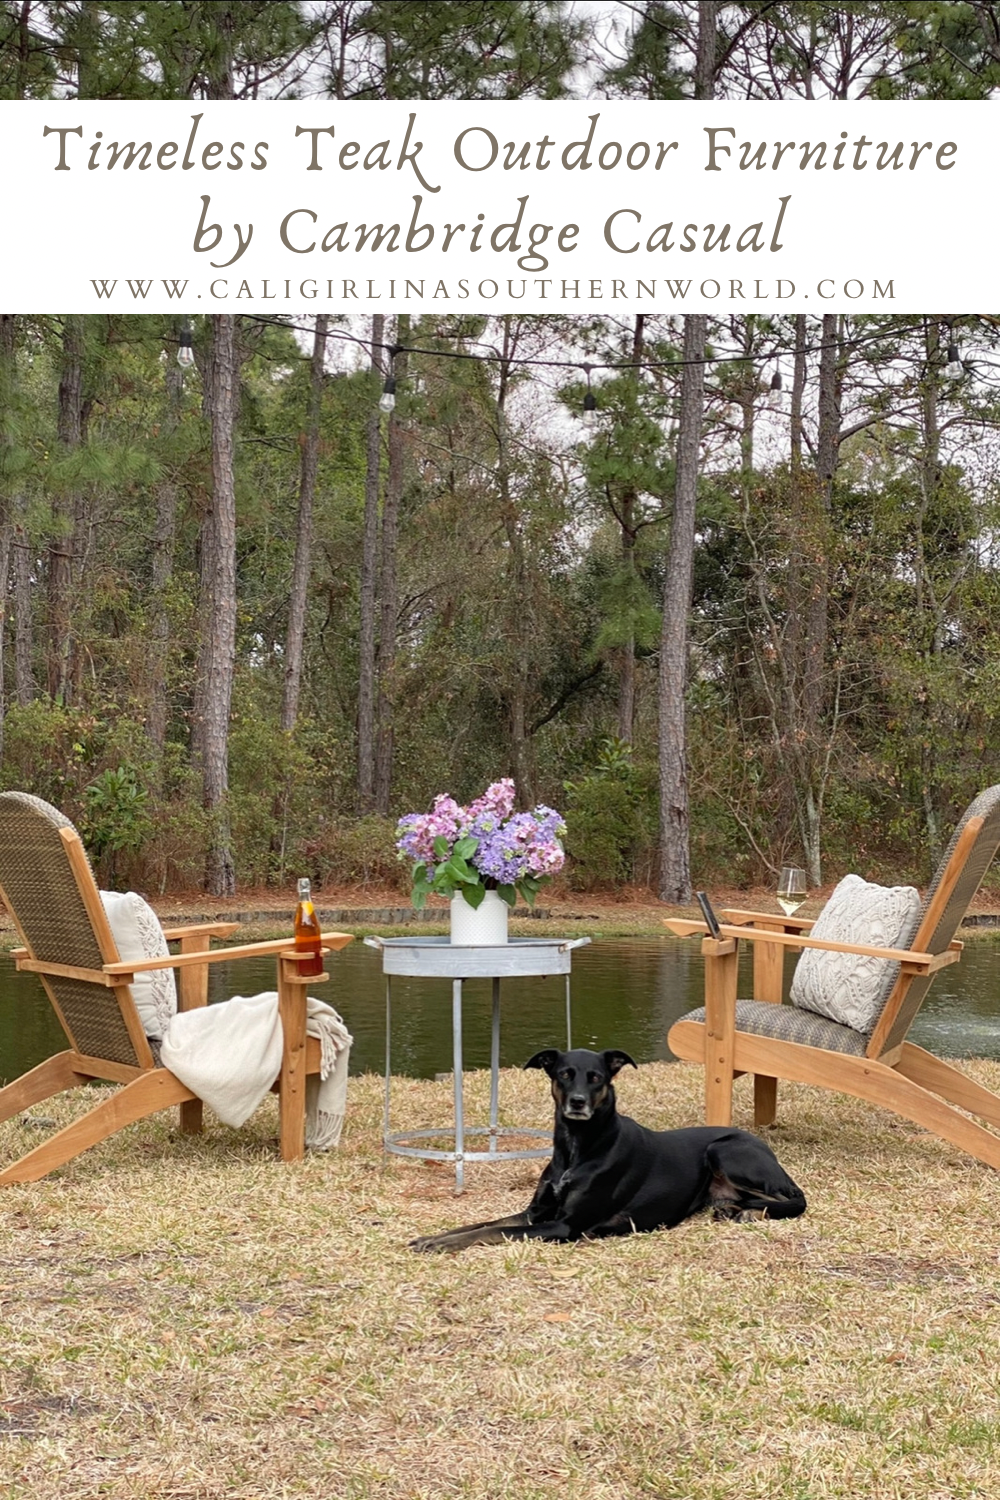 Pinterest Pin for Timeless Teak Outdoor Furniture by Cambridge Casual.